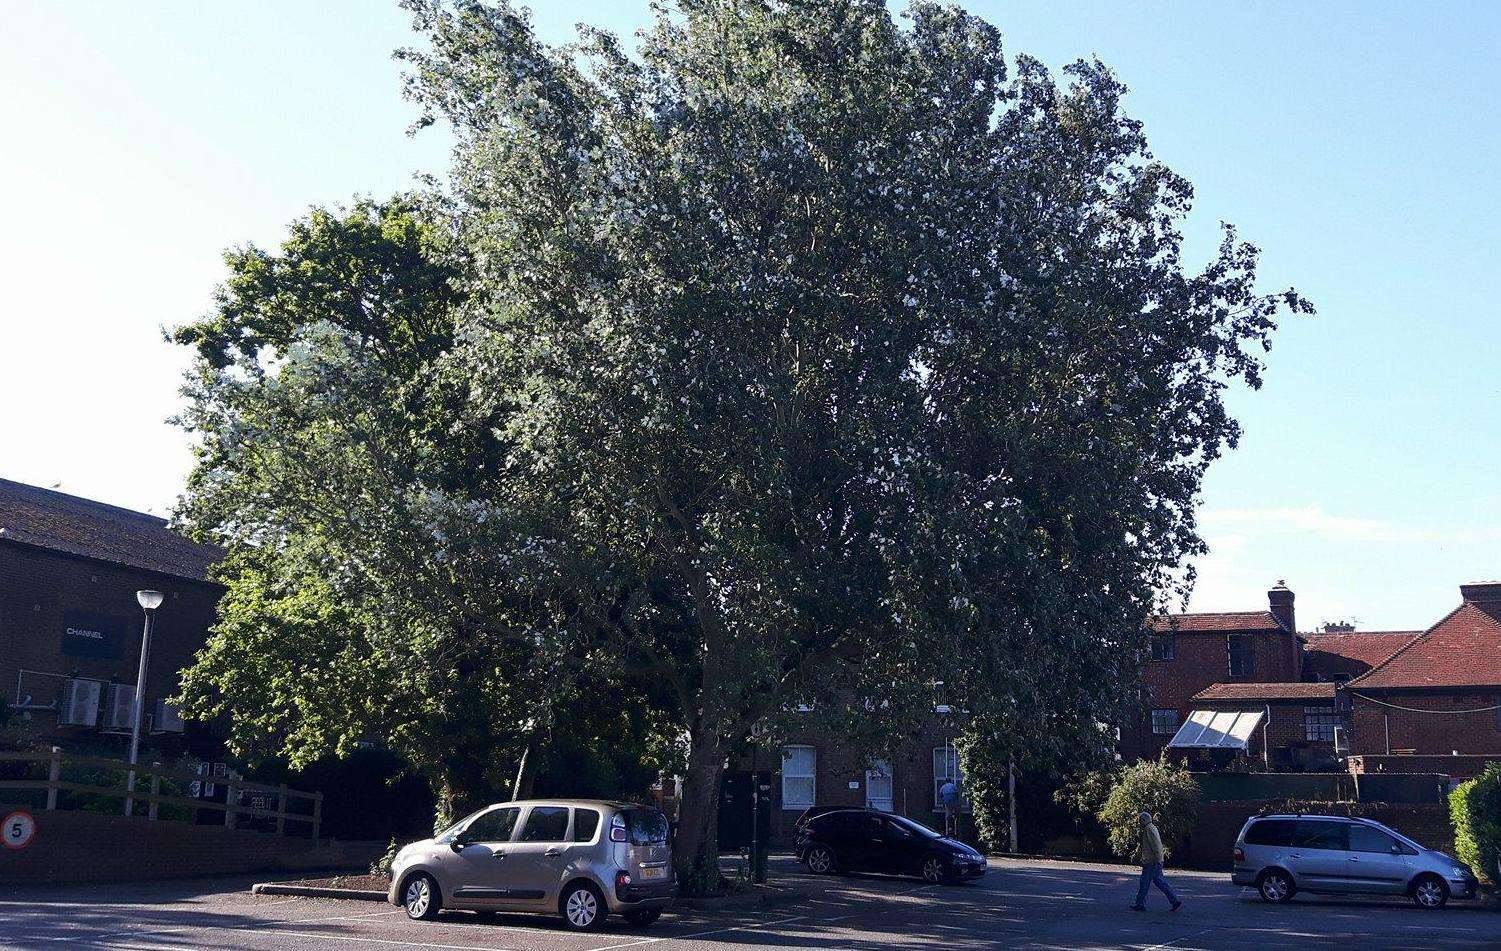 One of the mature trees proposed to be felled as part of Aldi’s plans